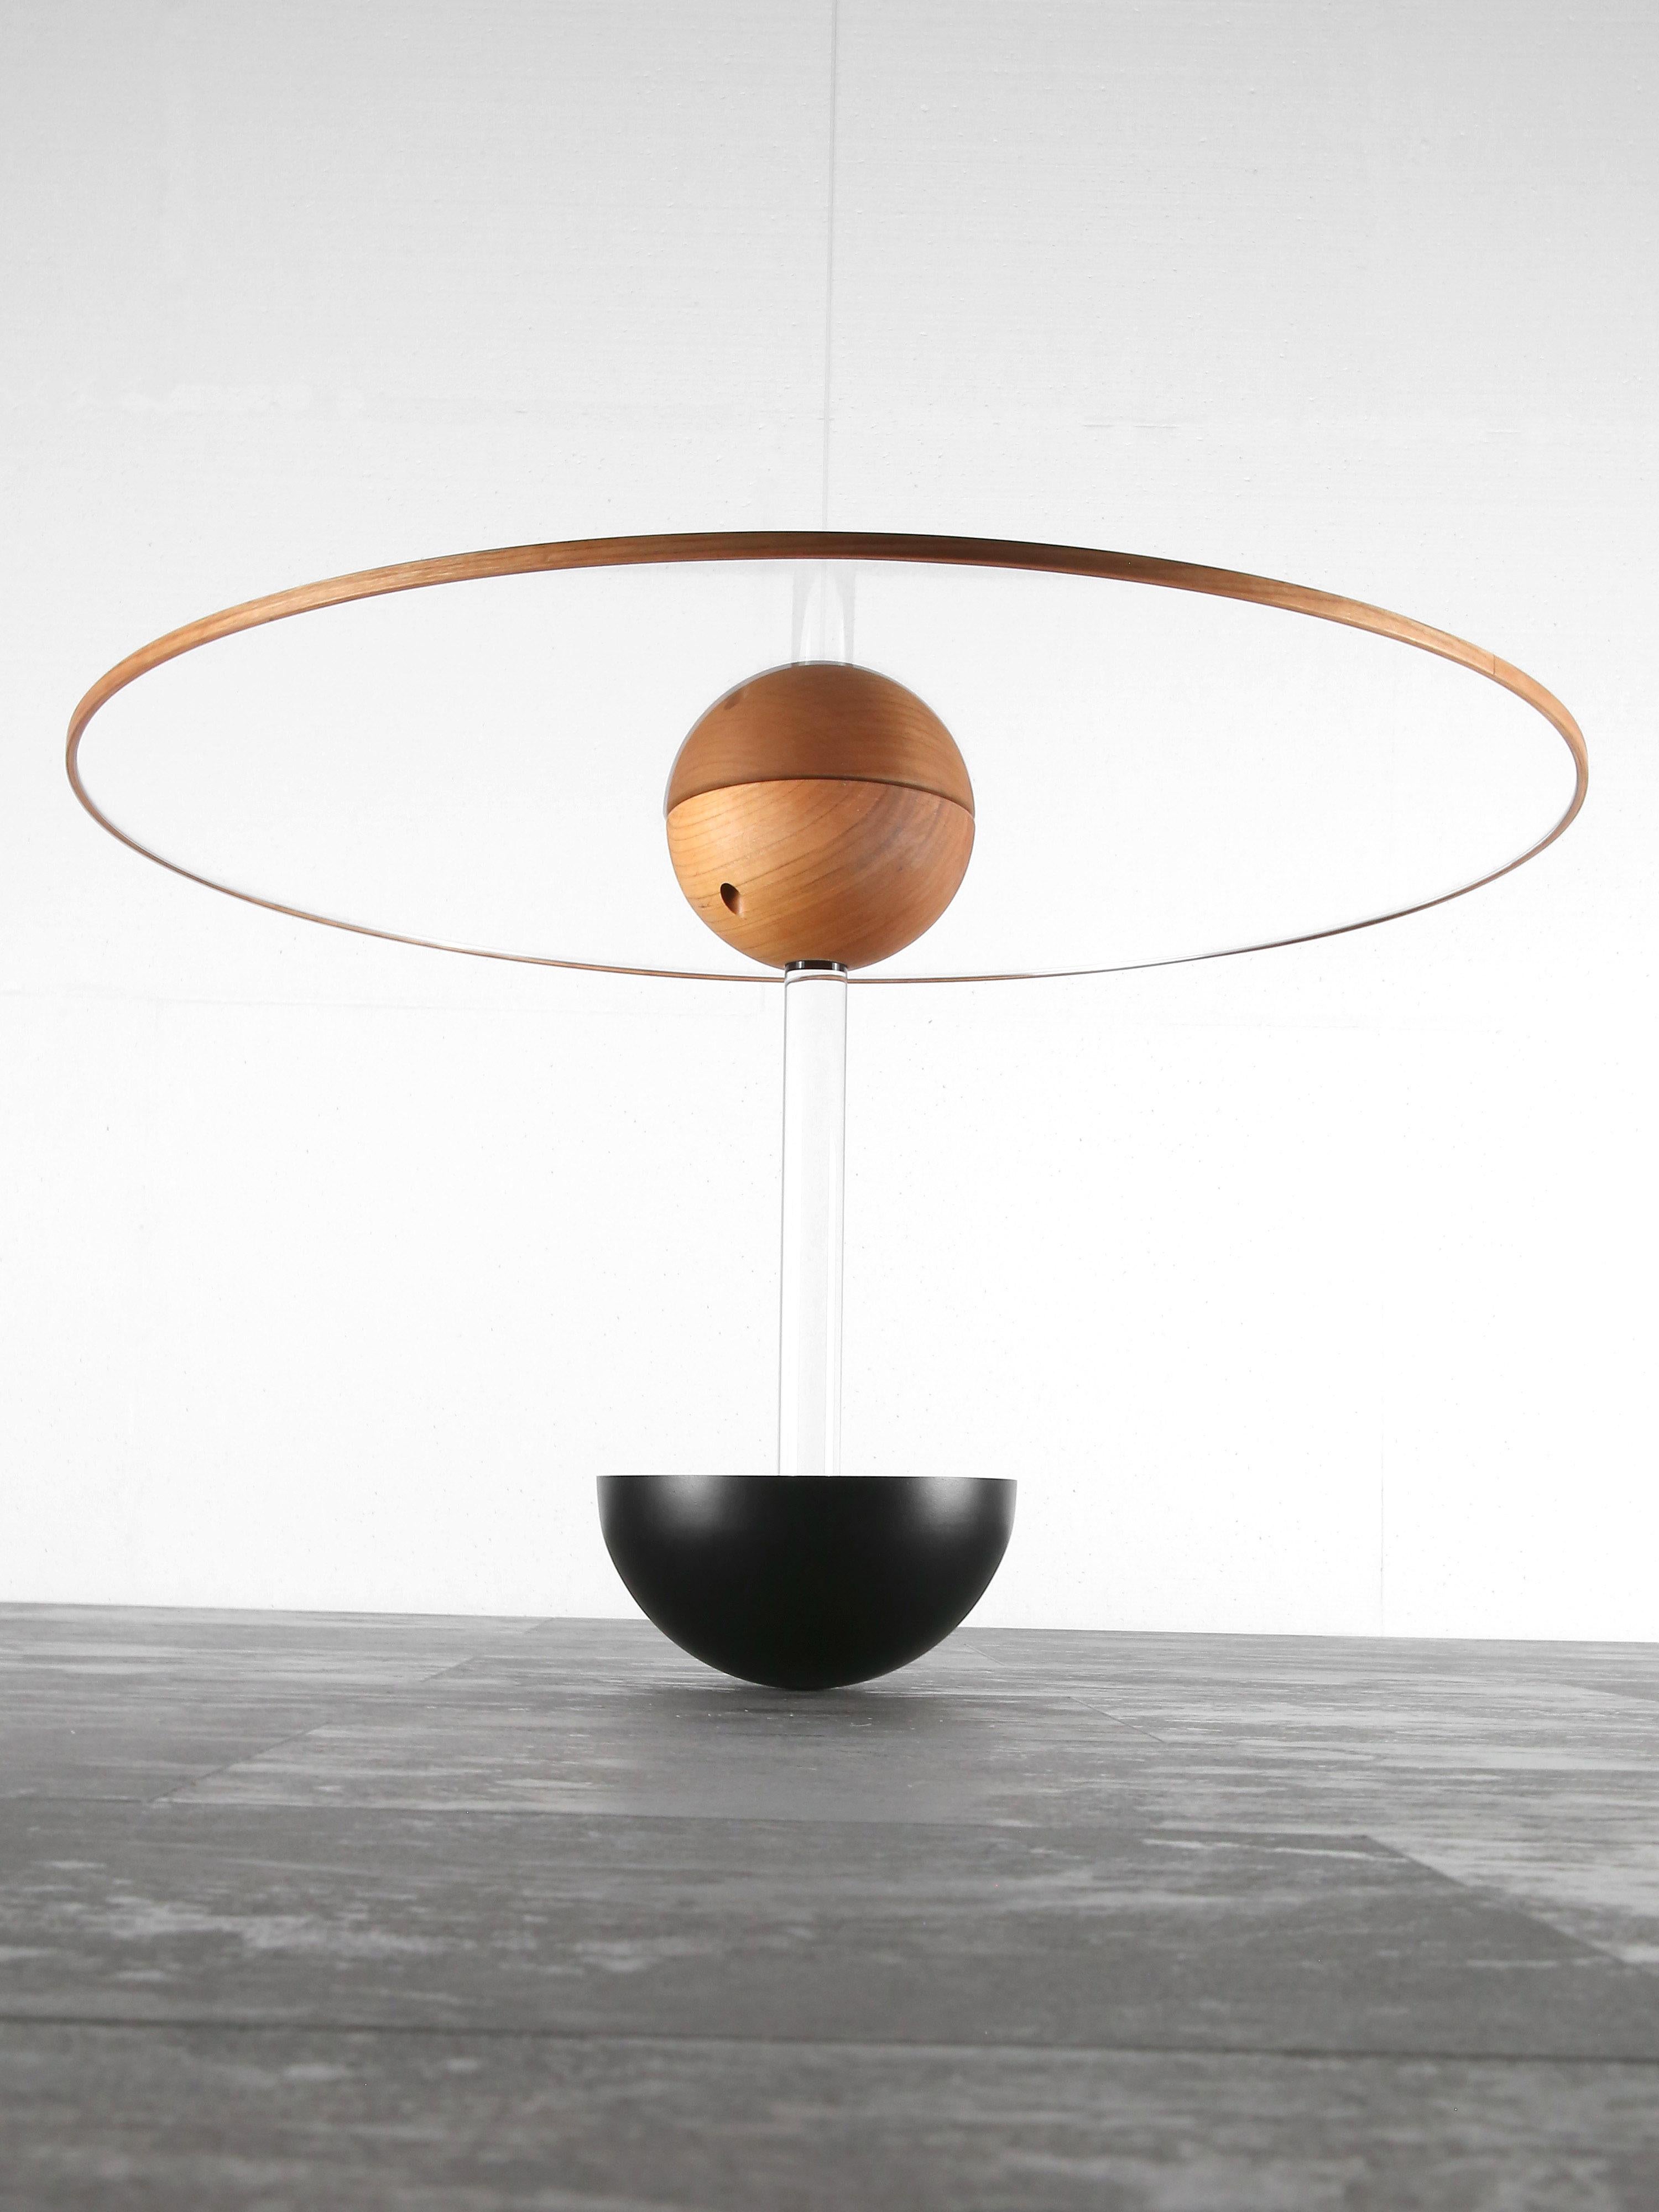 Coffee table BalanceTable is made of acrylic glass, solid cherry wood and two hemispheres, one of lacquered steel at the bottom and one of lacquered aluminium at the ceiling. 

This item plays with gravity by standing only on the pole of the lower